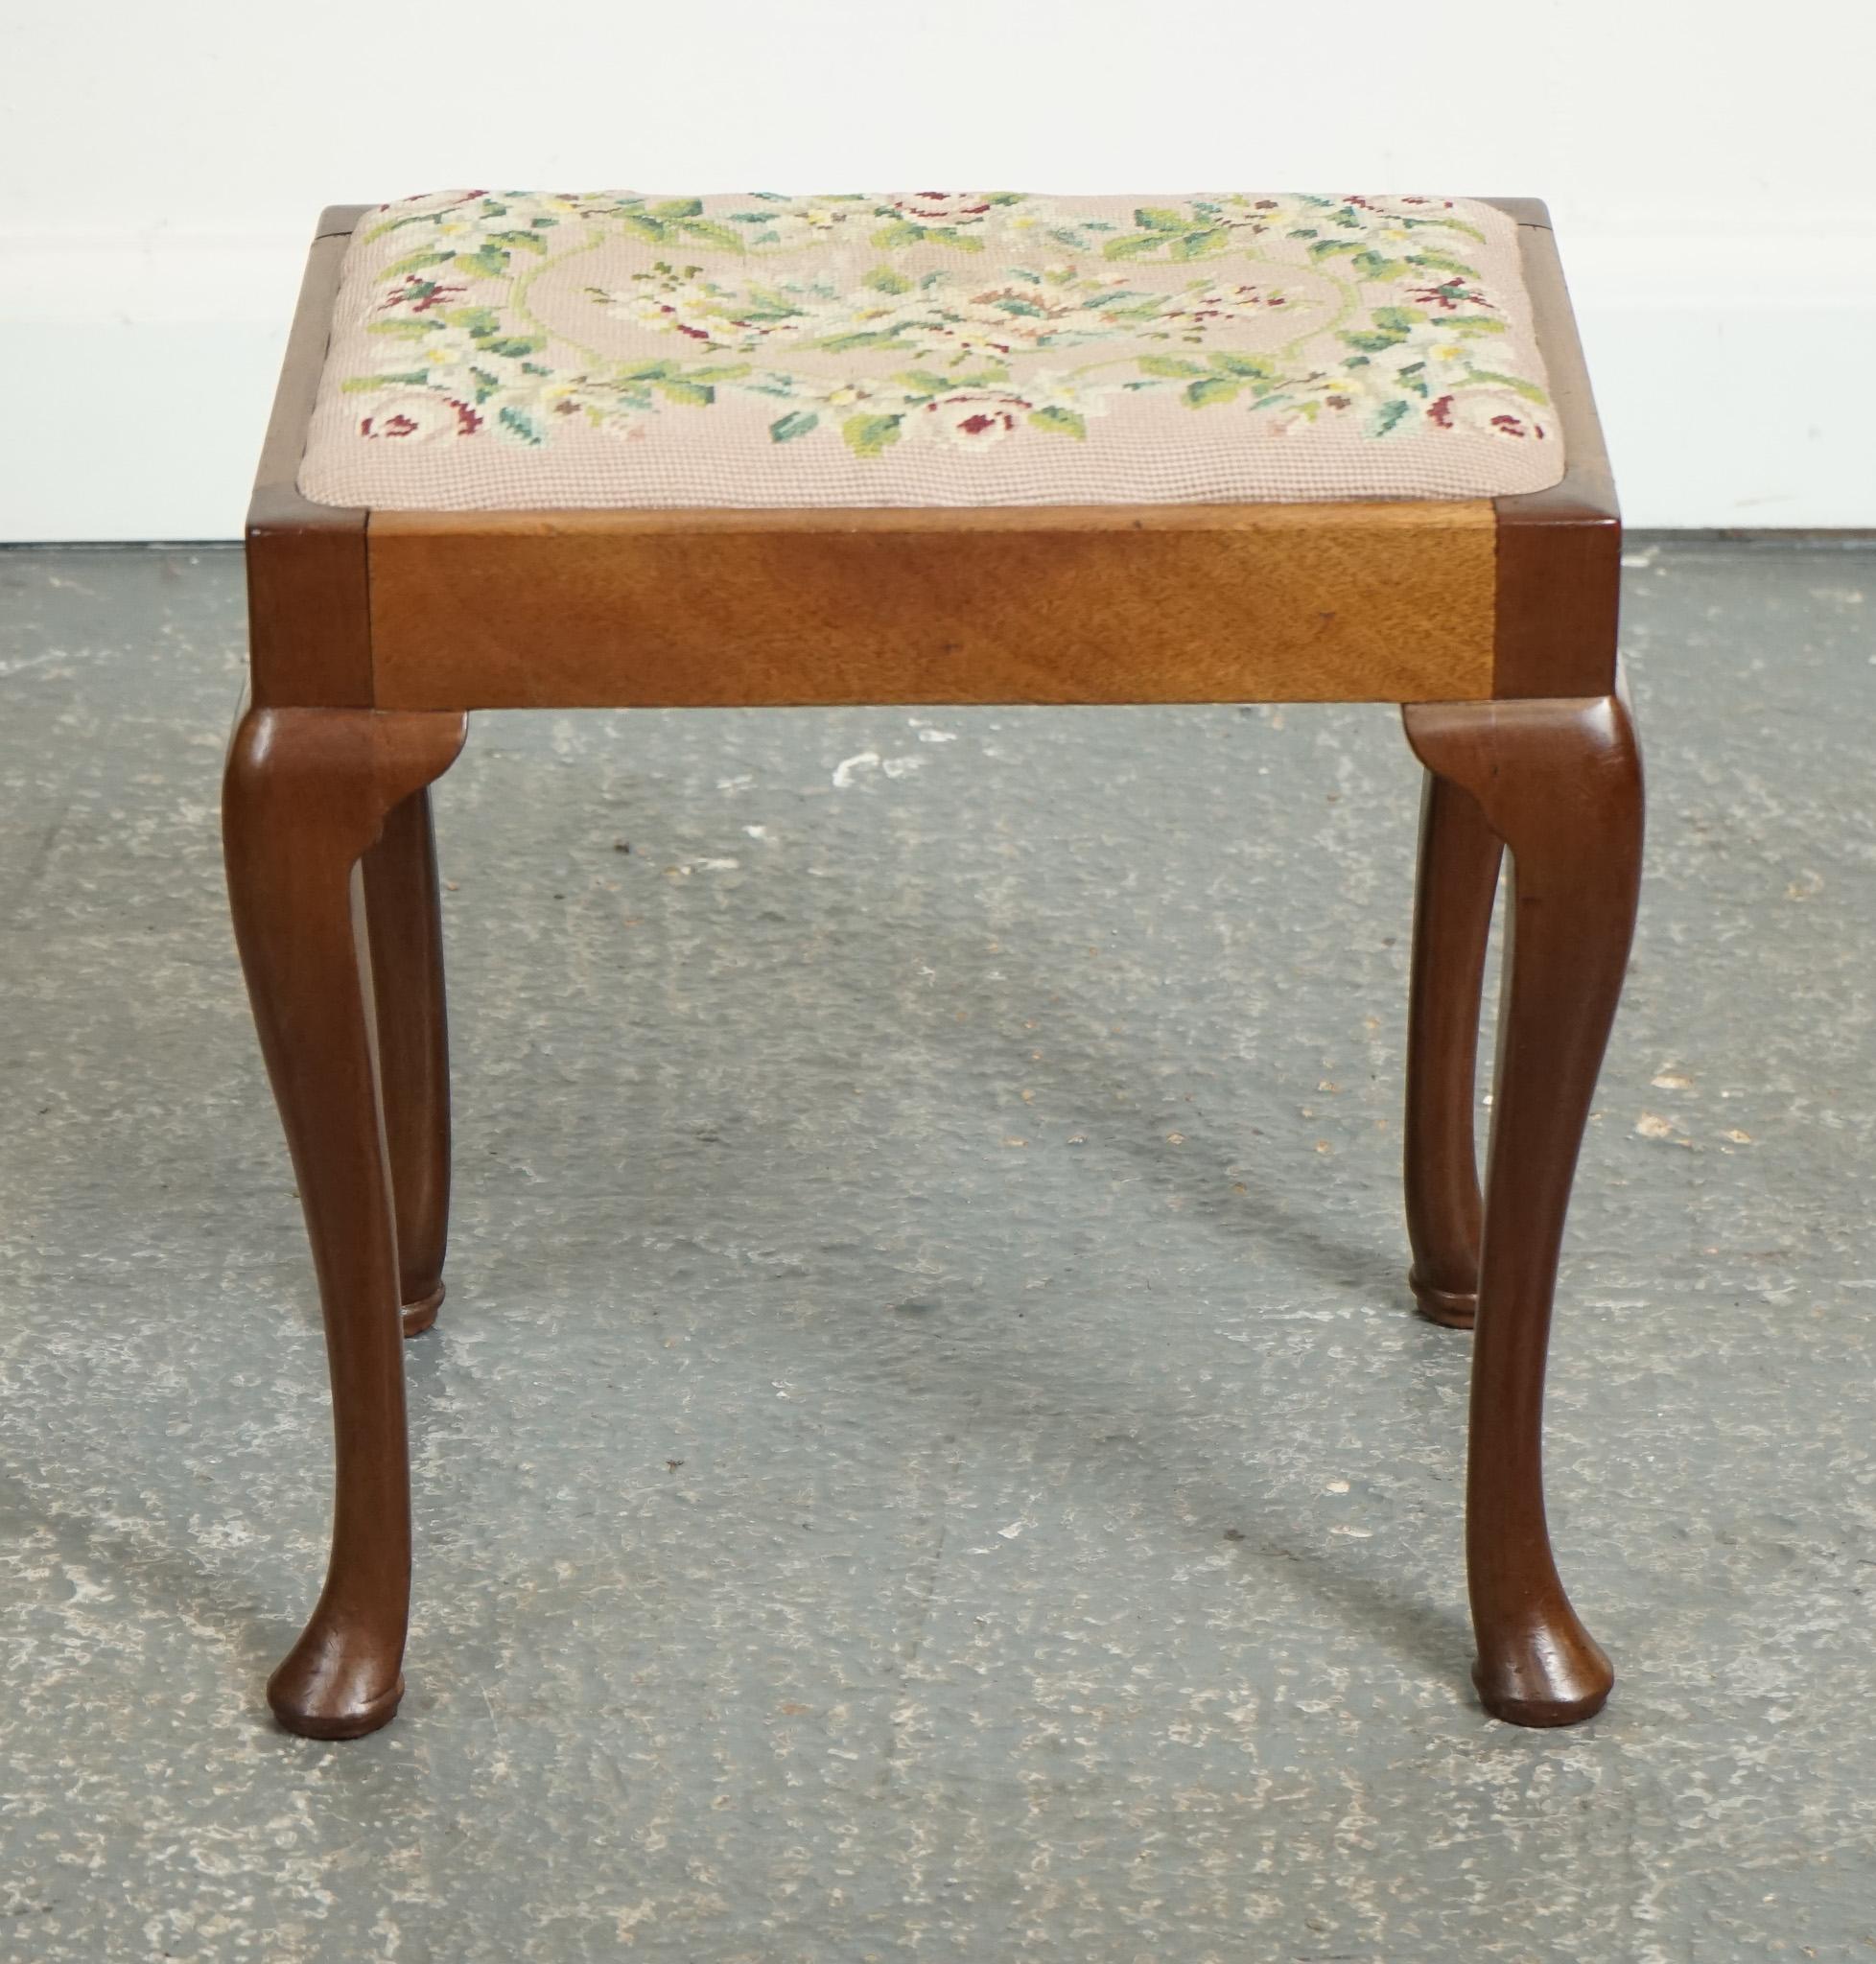 Queen Anne LOVELY PIANO DRESSING TABLE STOOL WITH FLOWER STITCHWORK WITH QUEEN ANNE LEGS j1 For Sale